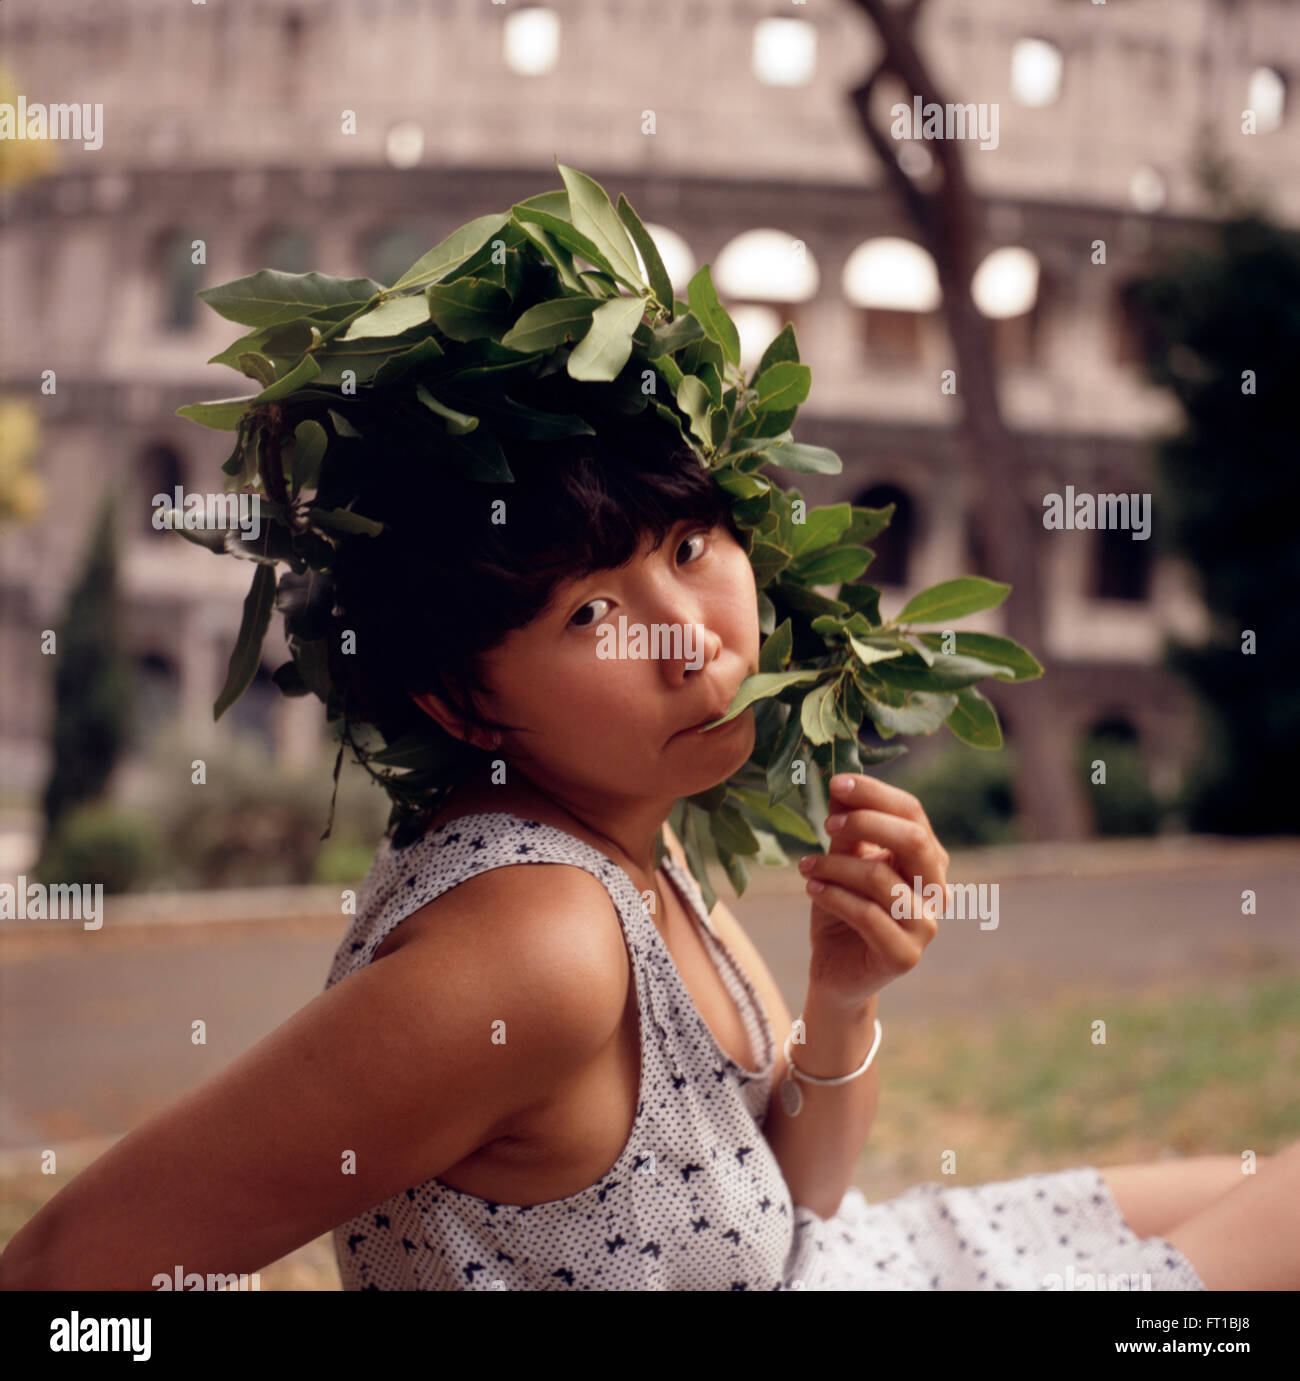 Young Asian girl with a laurel wreath on her head, in front of Colosseum, Rome, Italy Young woman wreath Stock Photo